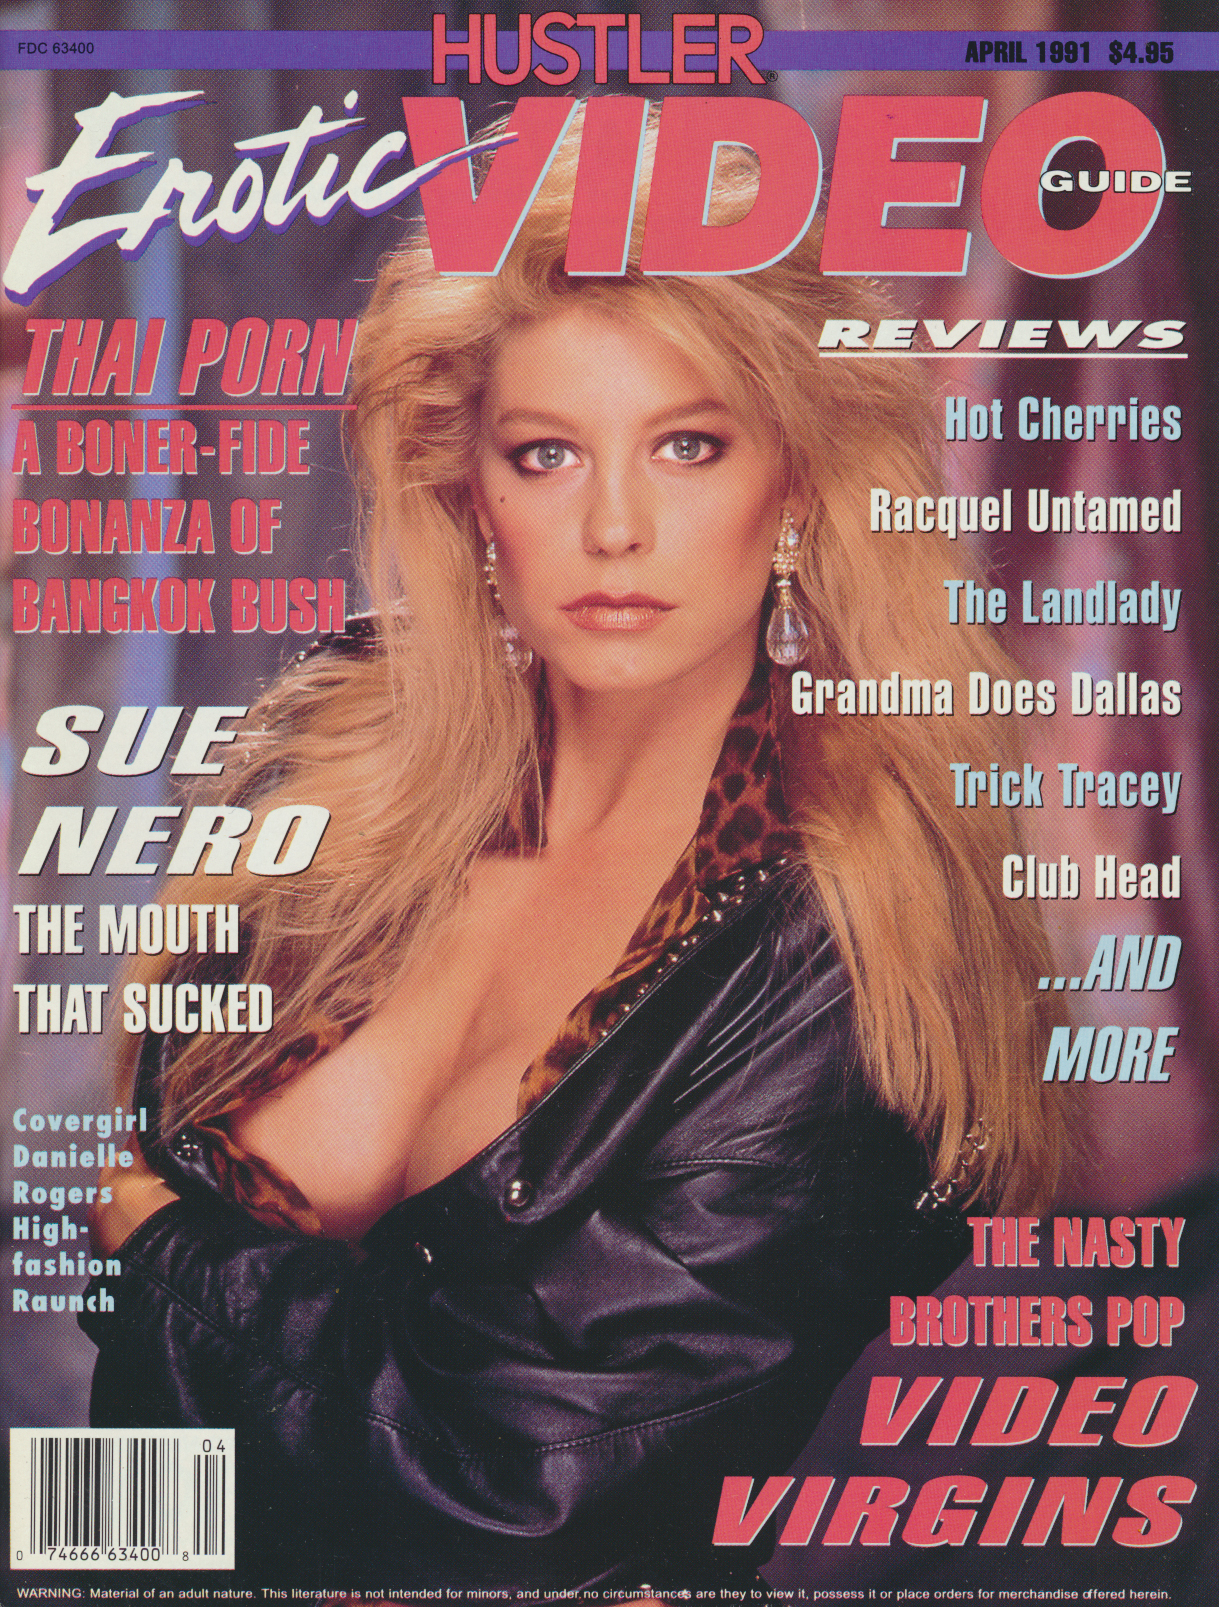 Hustler Erotic Video Guide April 1991 magazine back issue Hustler Erotic Video Guide magizine back copy Hustler Erotic Video Guide April 1991 Adult Pornographic Magazine Back Issue Published by LFP, Larry Flynt Publications. Covergirl Danielle Rogers.